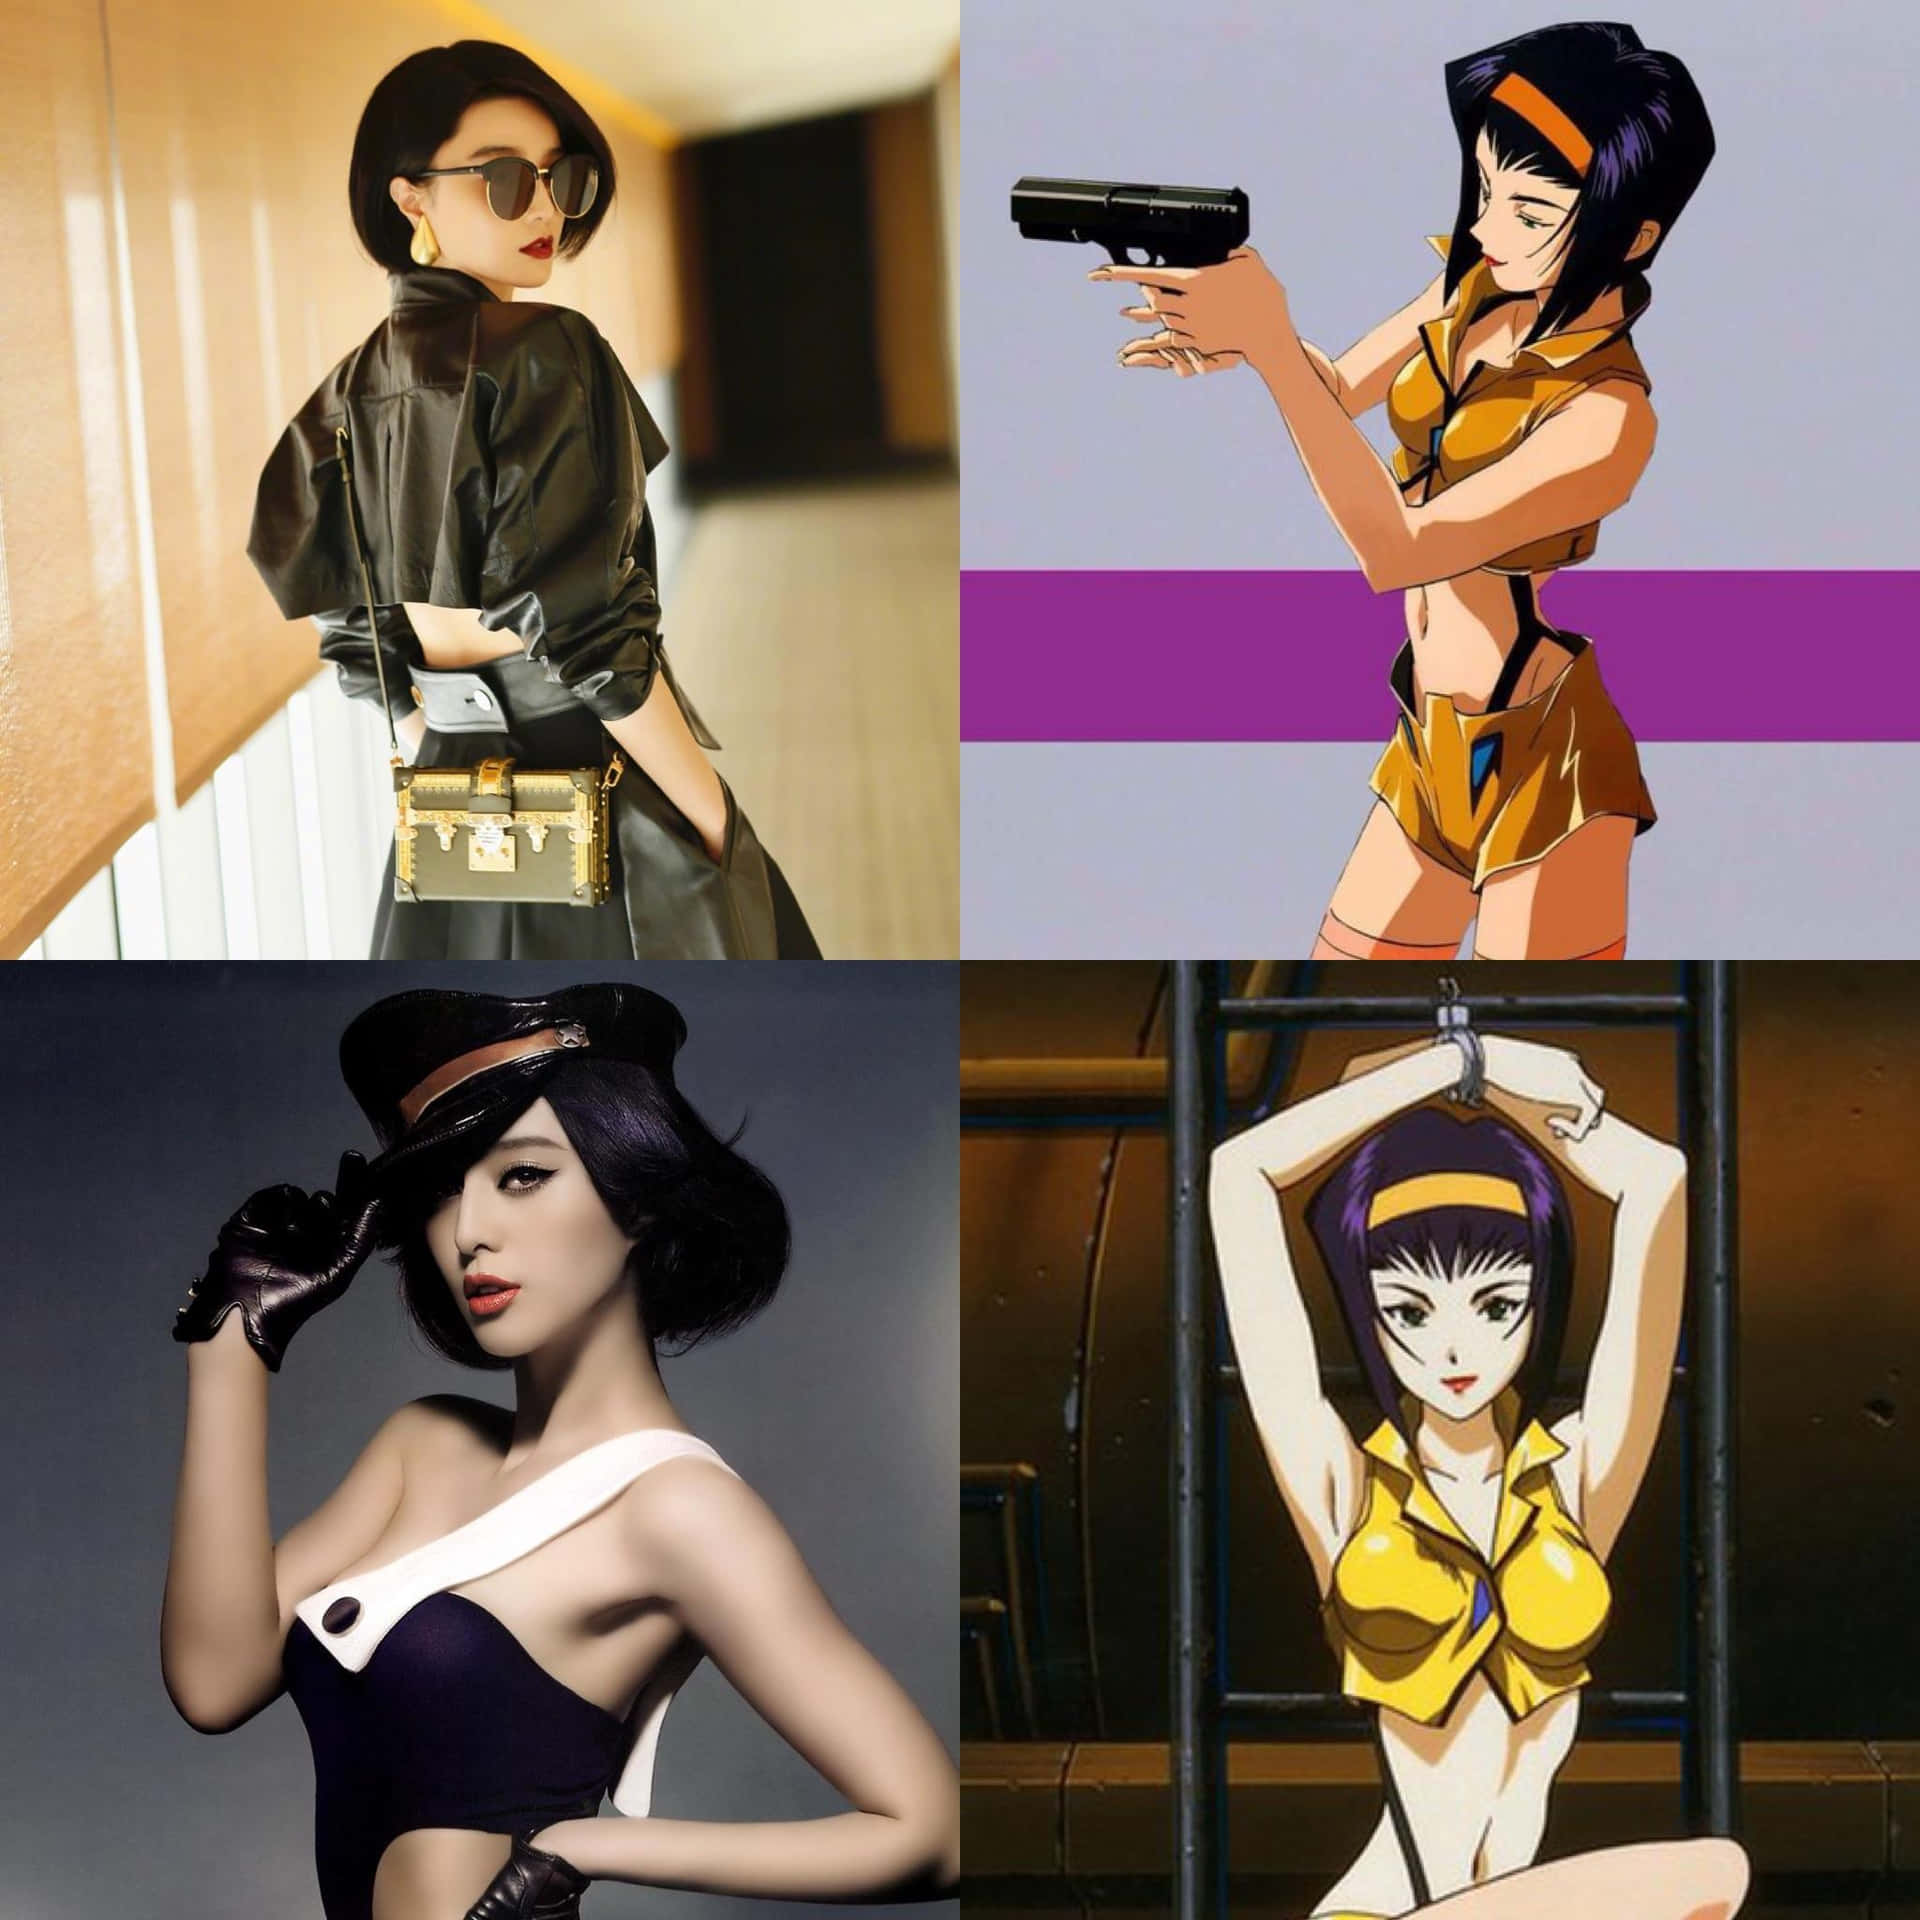 A cool and confident Faye Valentine posing with her signature weapon. Wallpaper